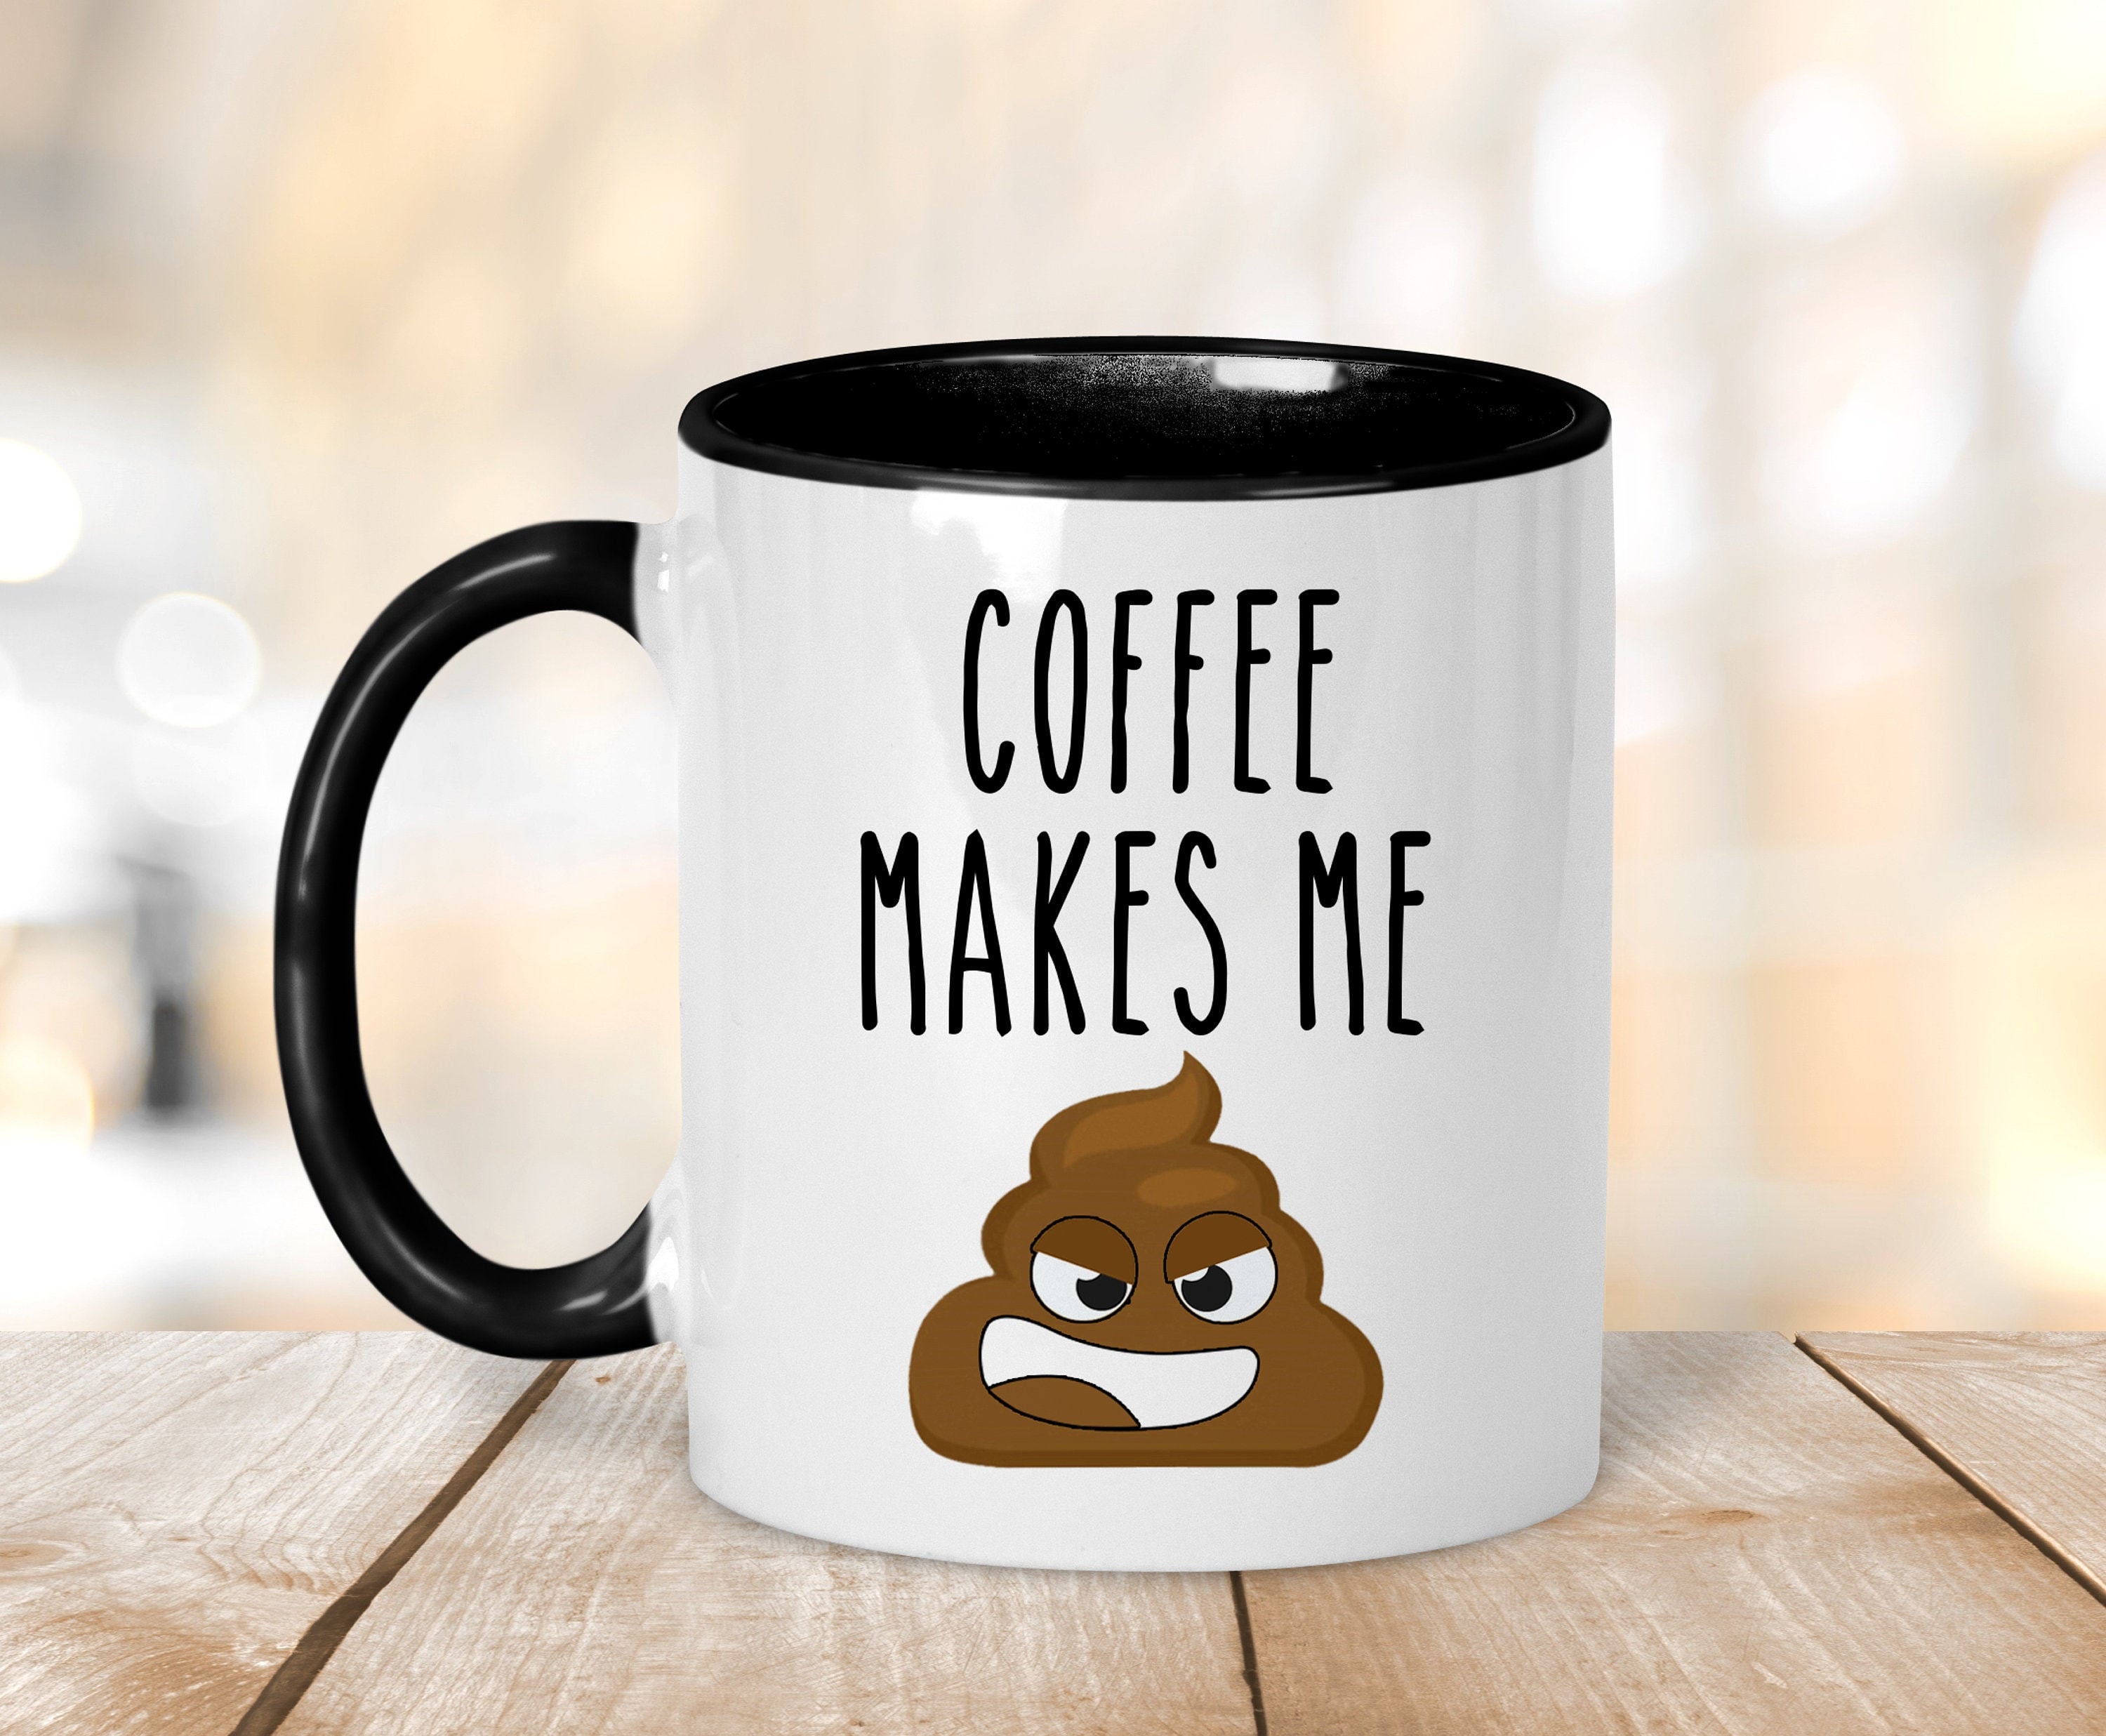 Coffee Makes me Poop Wipes Funny Gag Gifts by GearsOut - Stocking Stuffers  for Men - When the Funny Coffee Mugs Empty Time to Poo